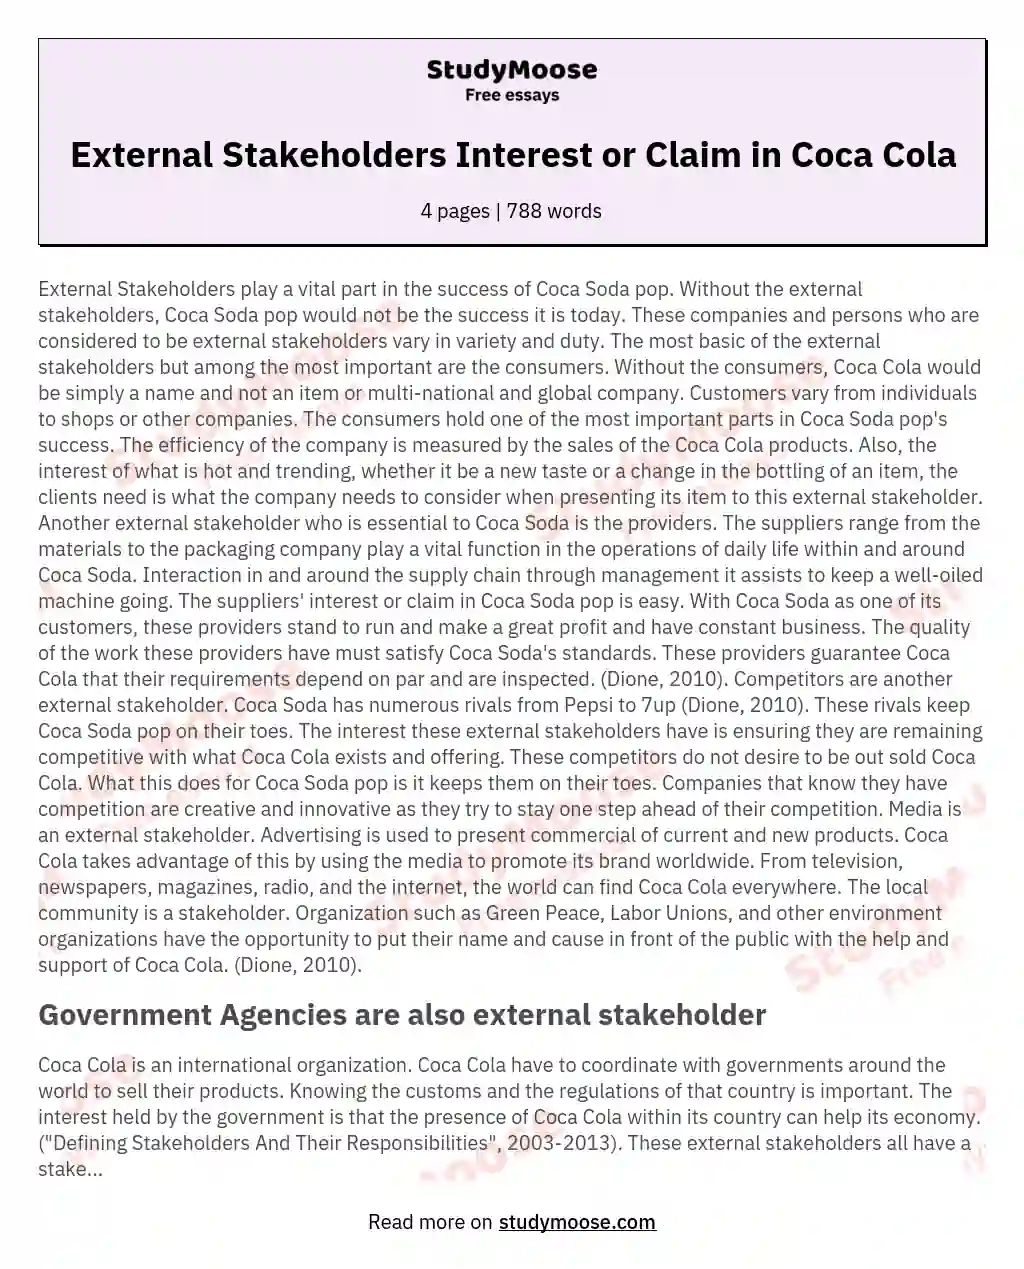 External Stakeholders Interest or Claim in Coca Cola essay